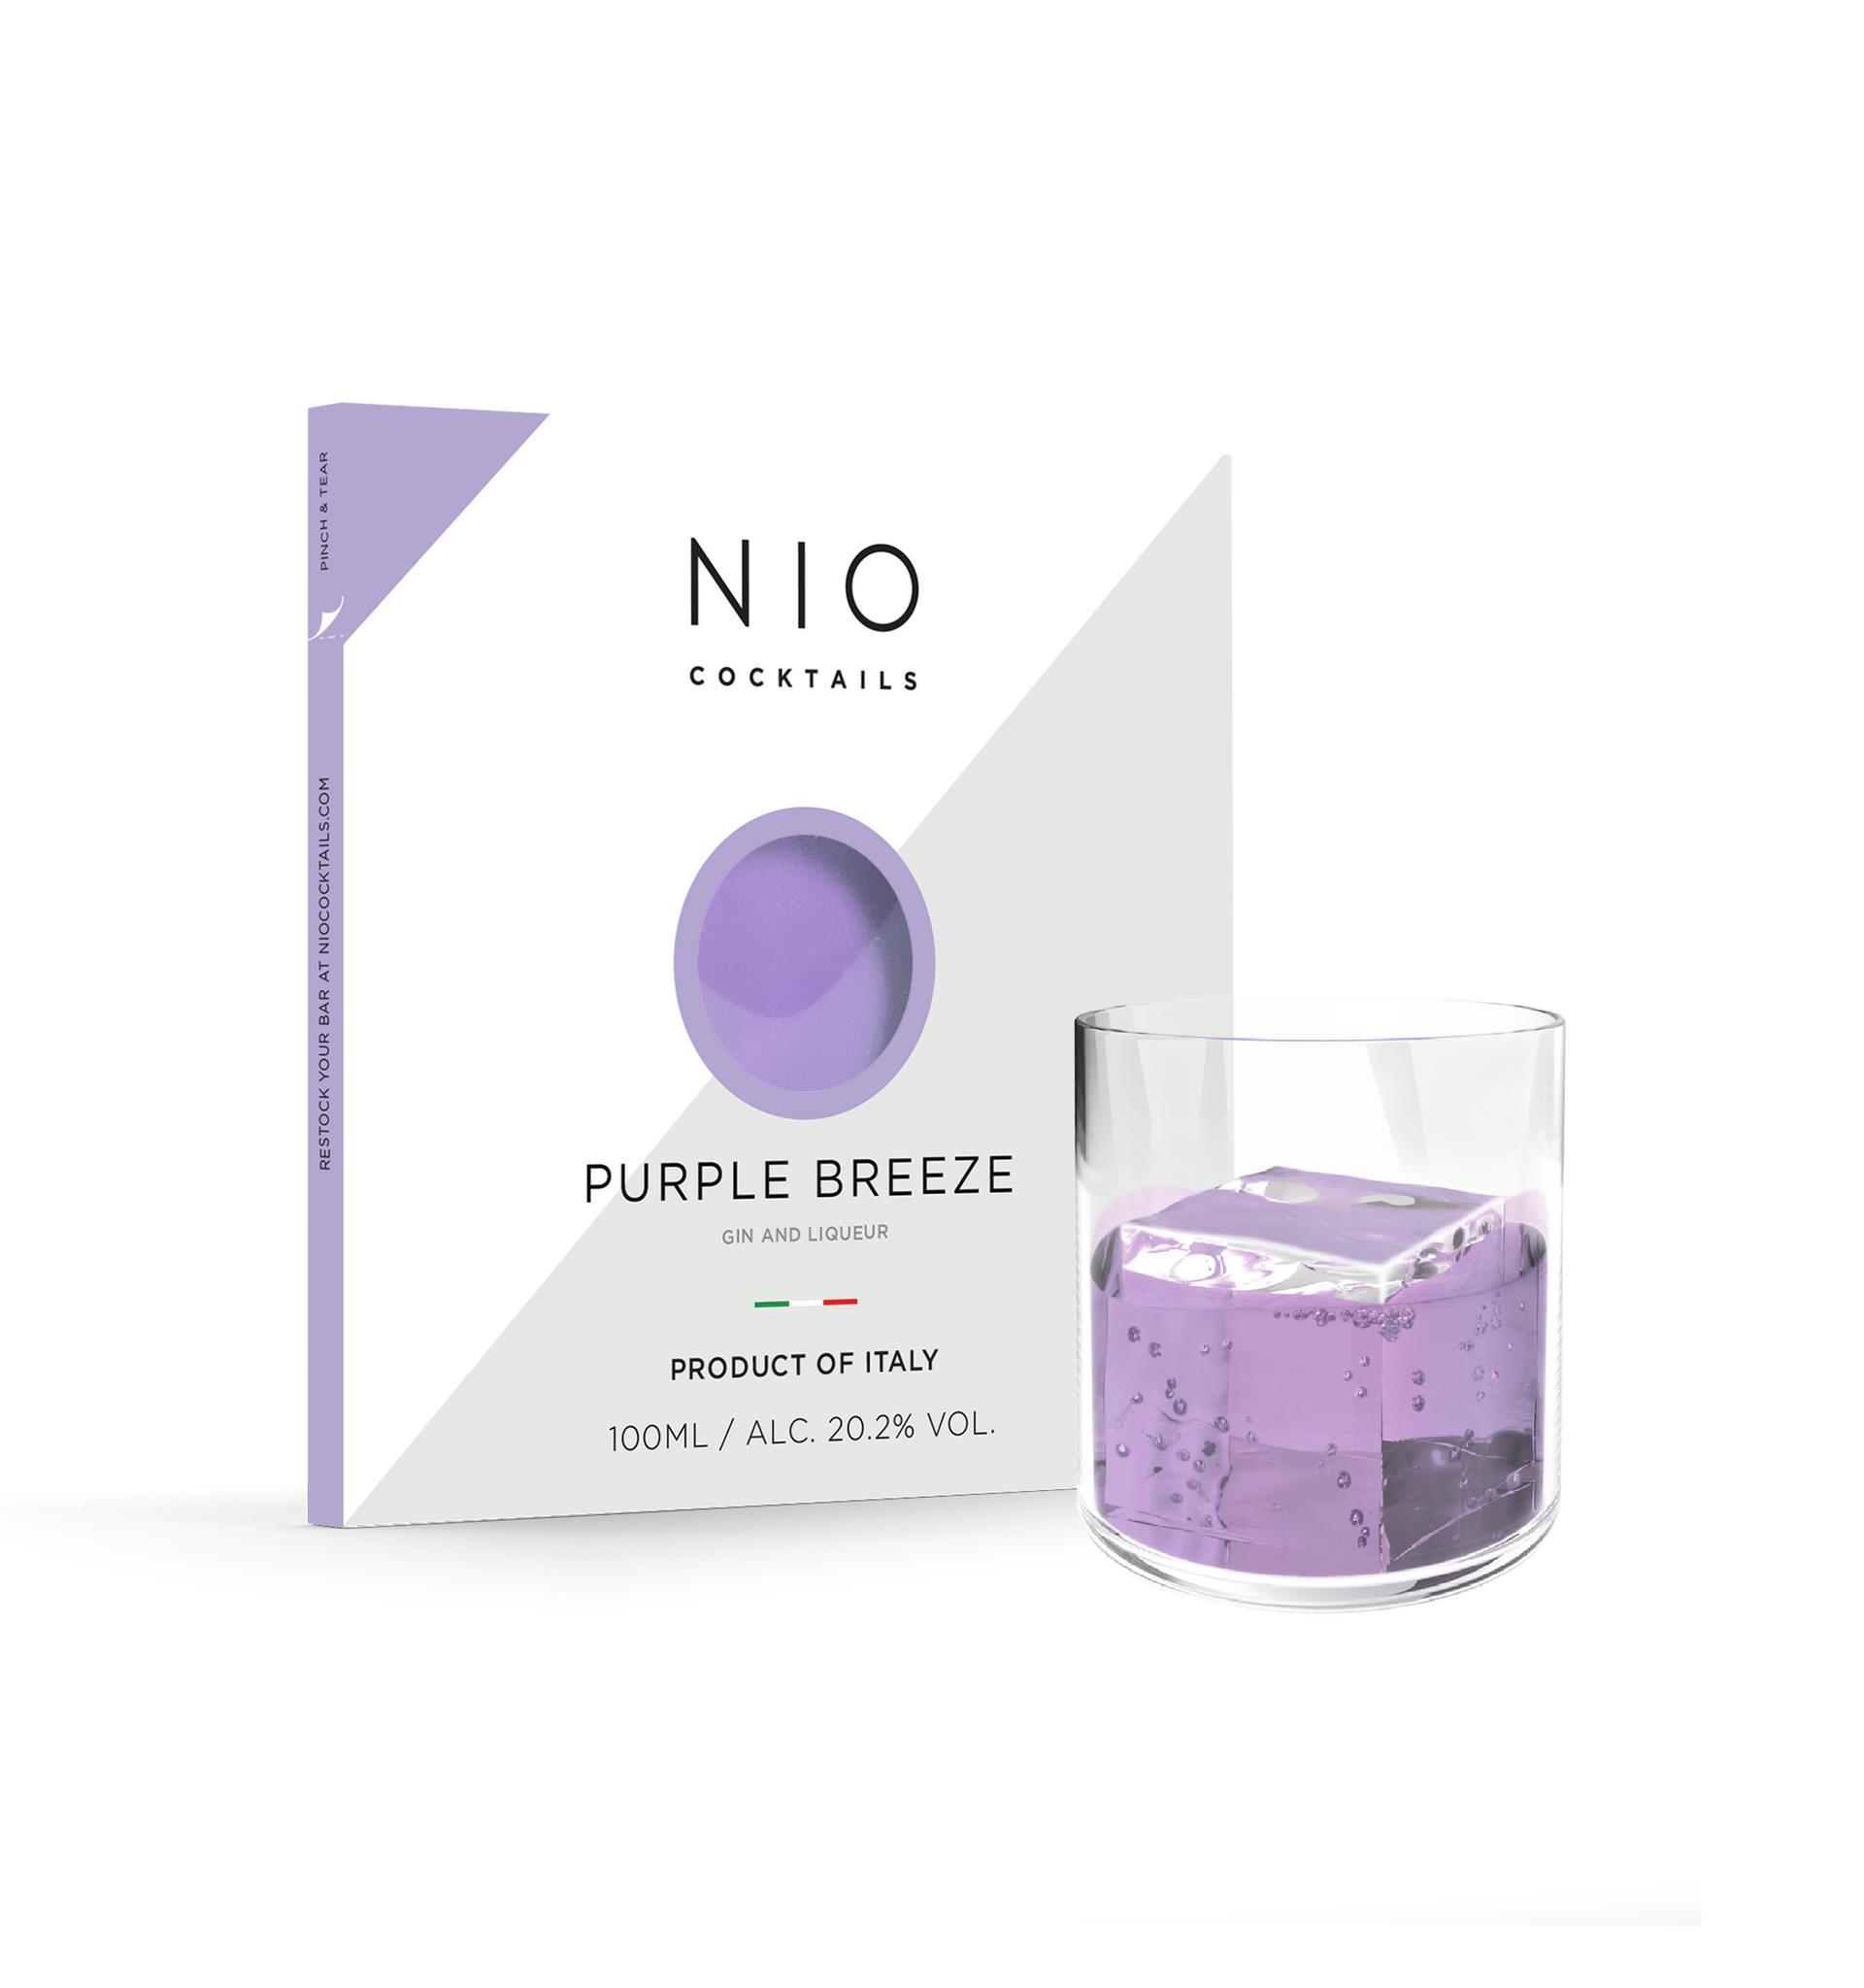 Purple Breeze  The unmistakable floral notes of violets blend with the sharp notes of gin